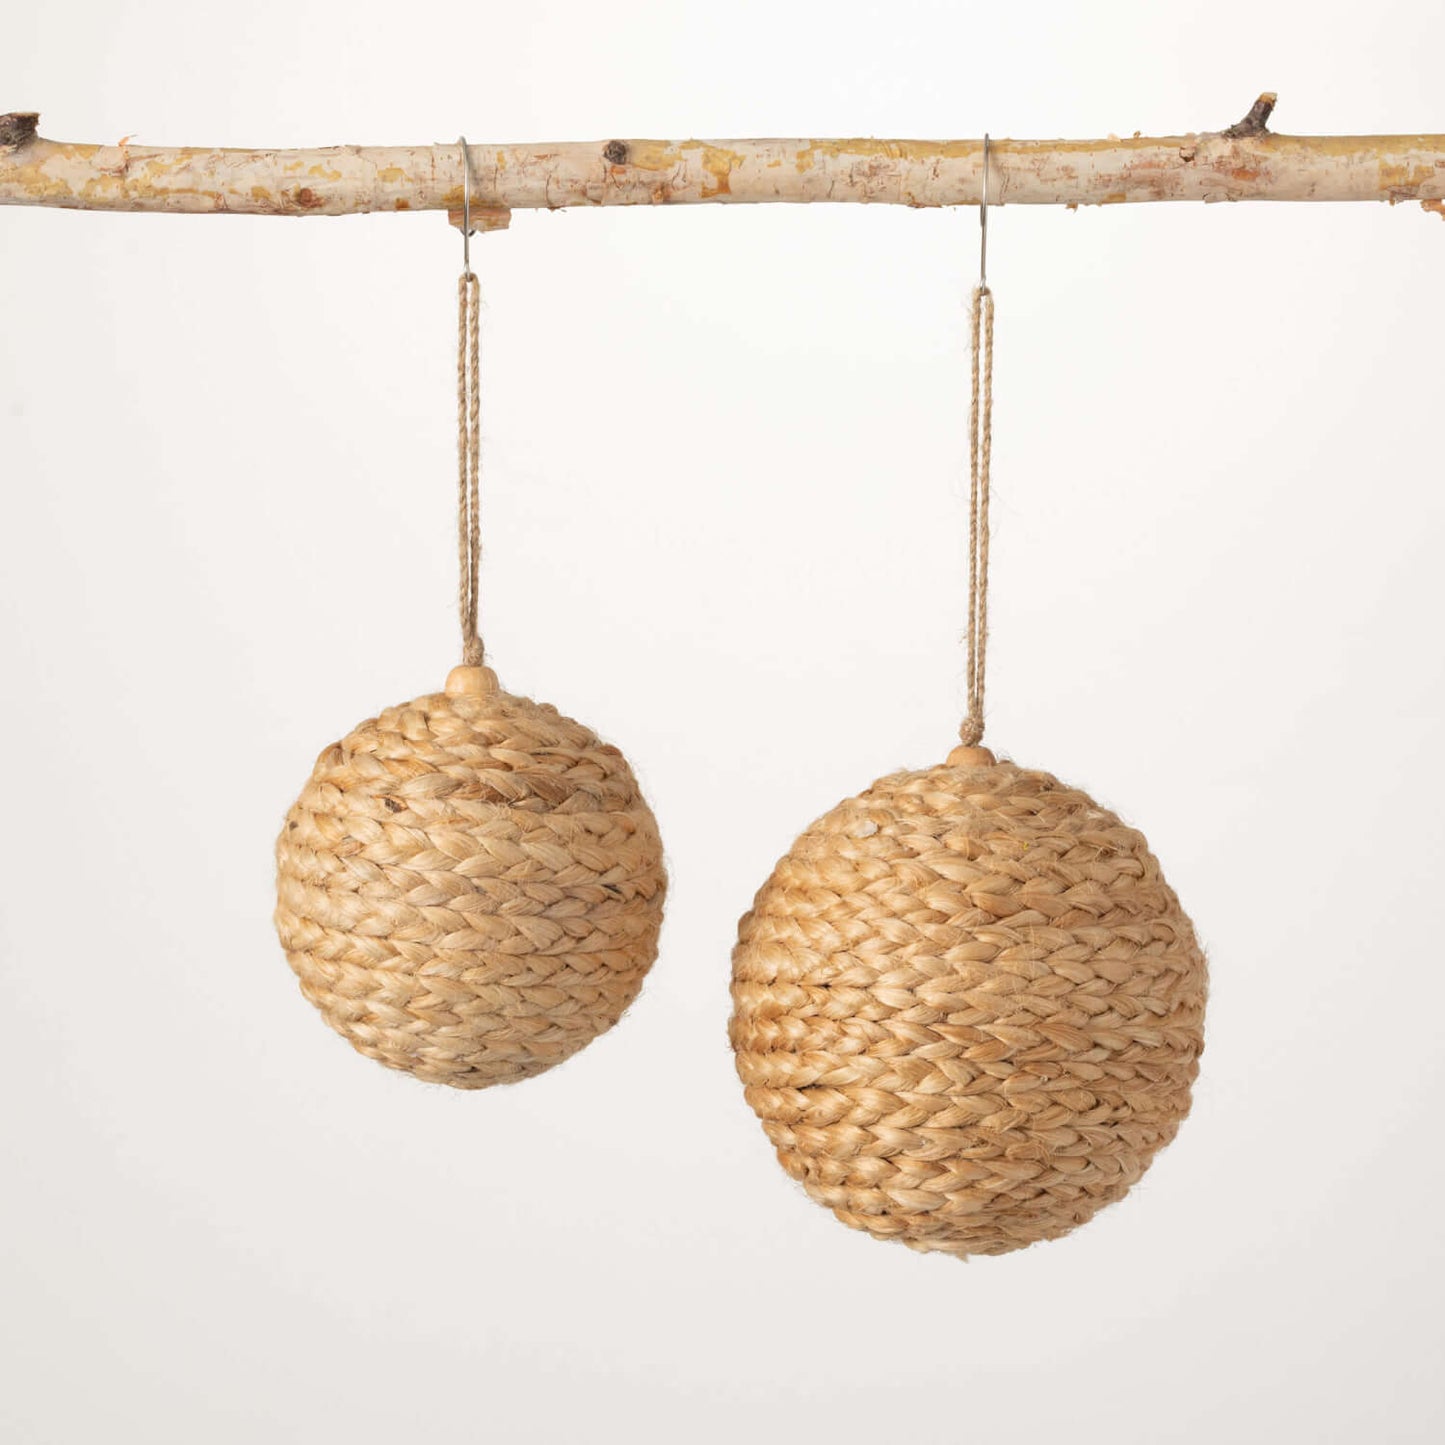 2 woven jute ball ornaments hanging from a branch.